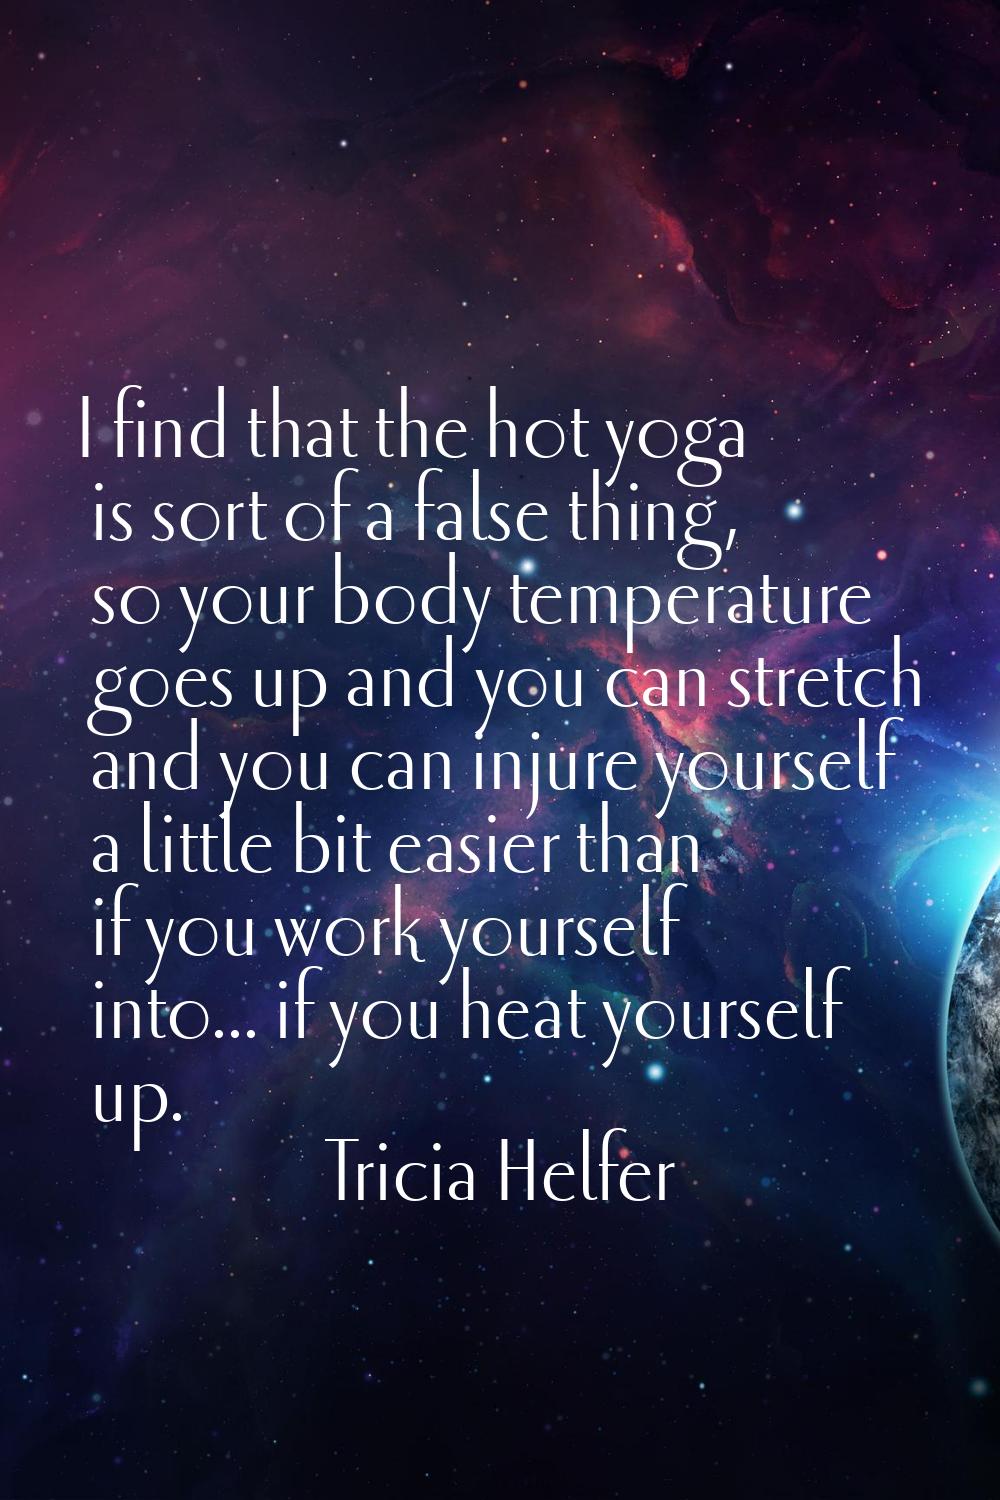 I find that the hot yoga is sort of a false thing, so your body temperature goes up and you can str